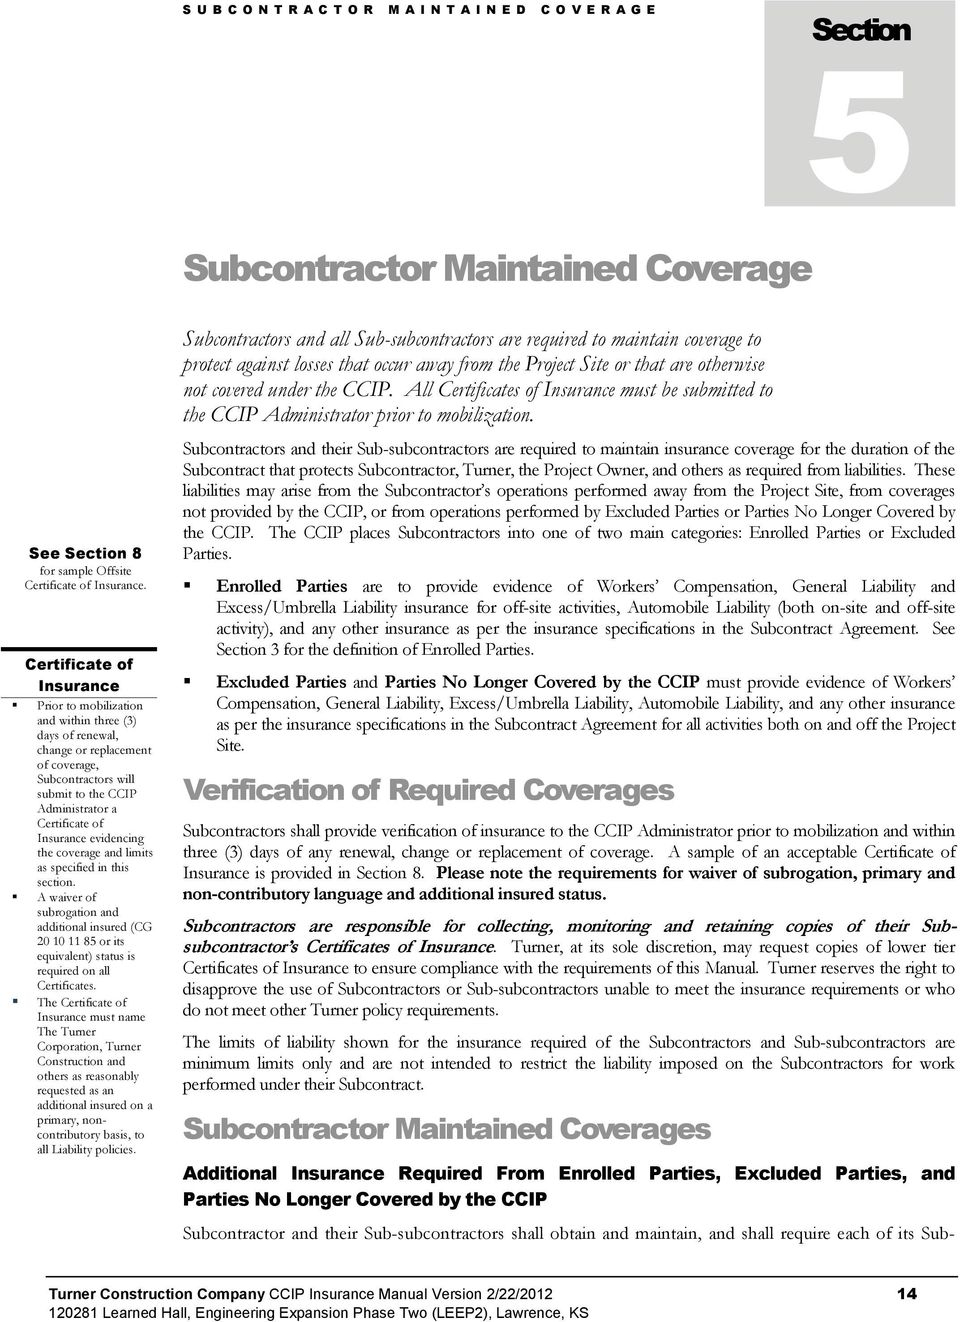 Subcontract Agreement Definition Ccip Insurance Manual Turner Construction Company Pdf